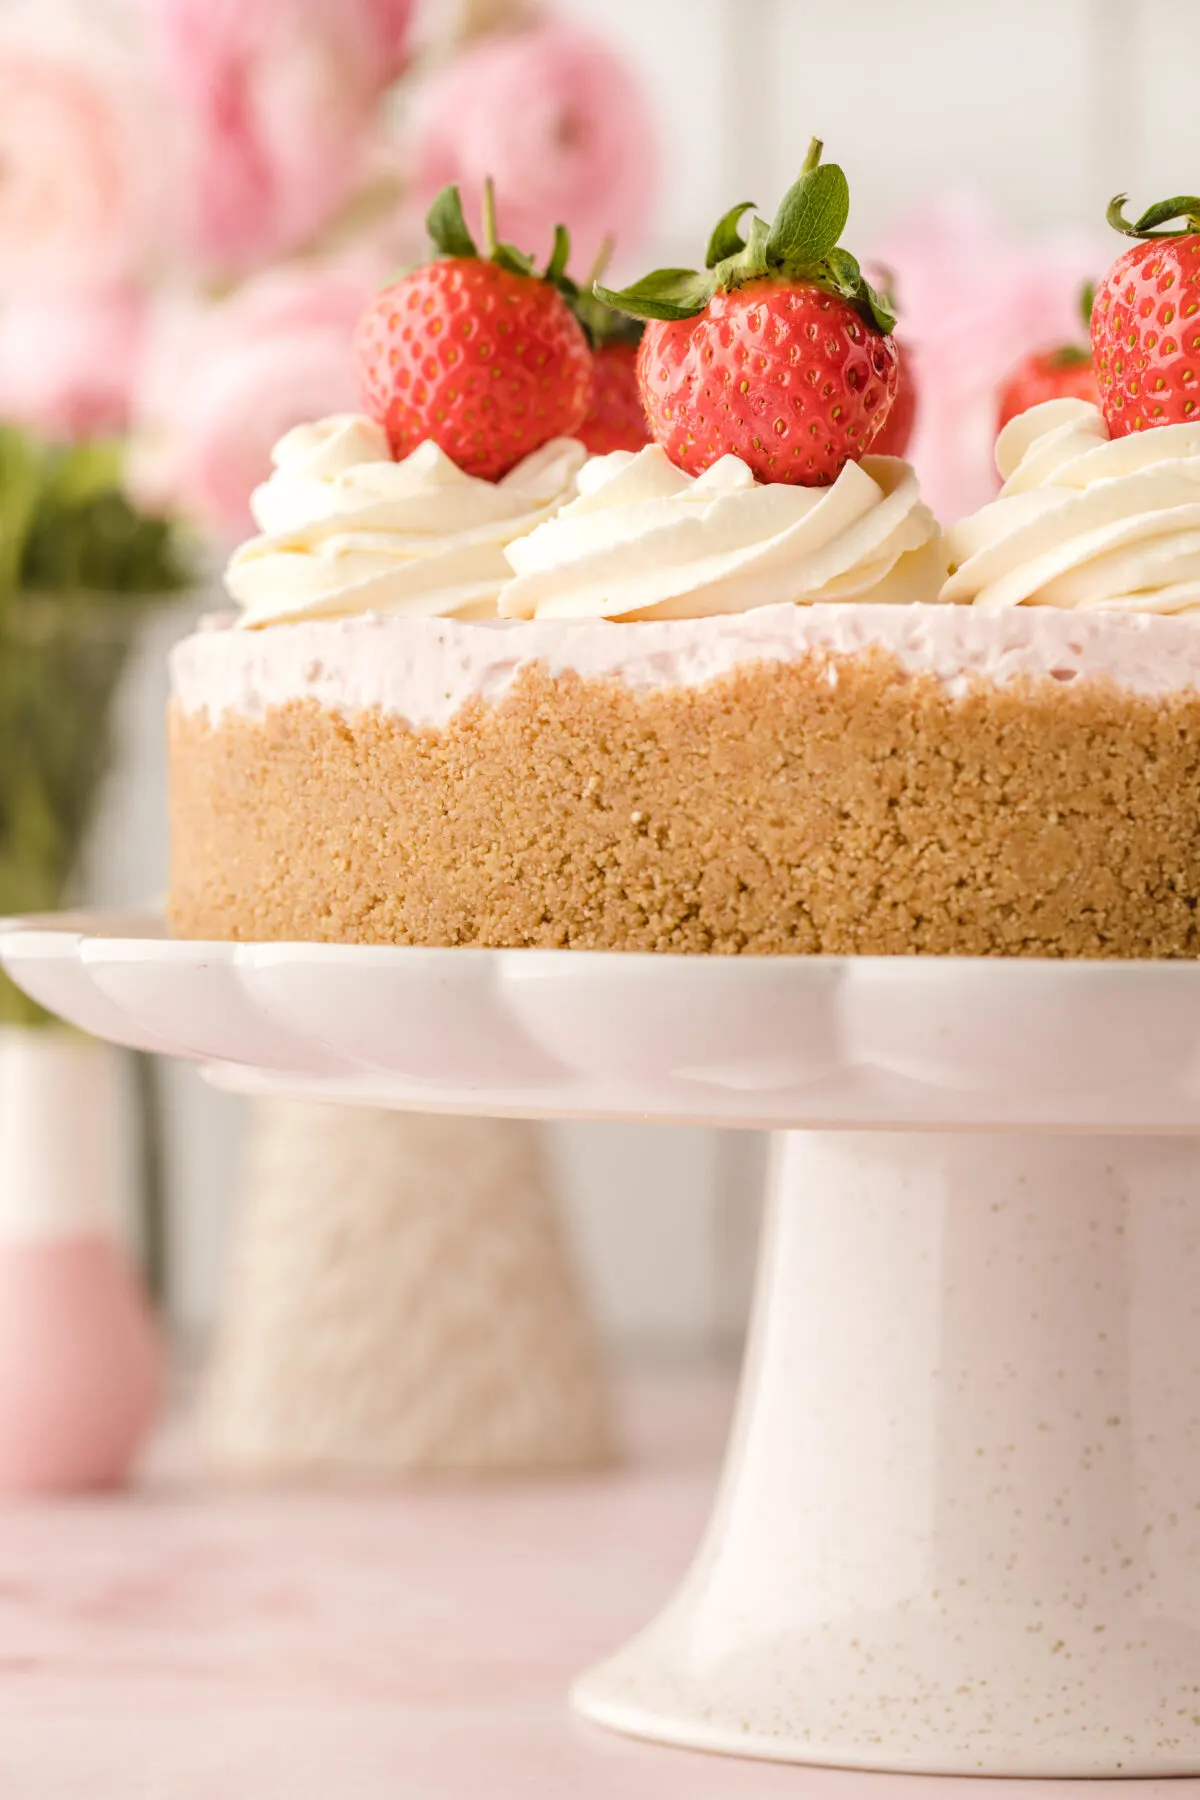 Get your fix of sweet strawberries with this no bake strawberry cheesecake recipe for a rich and creamy dessert the entire family will love!